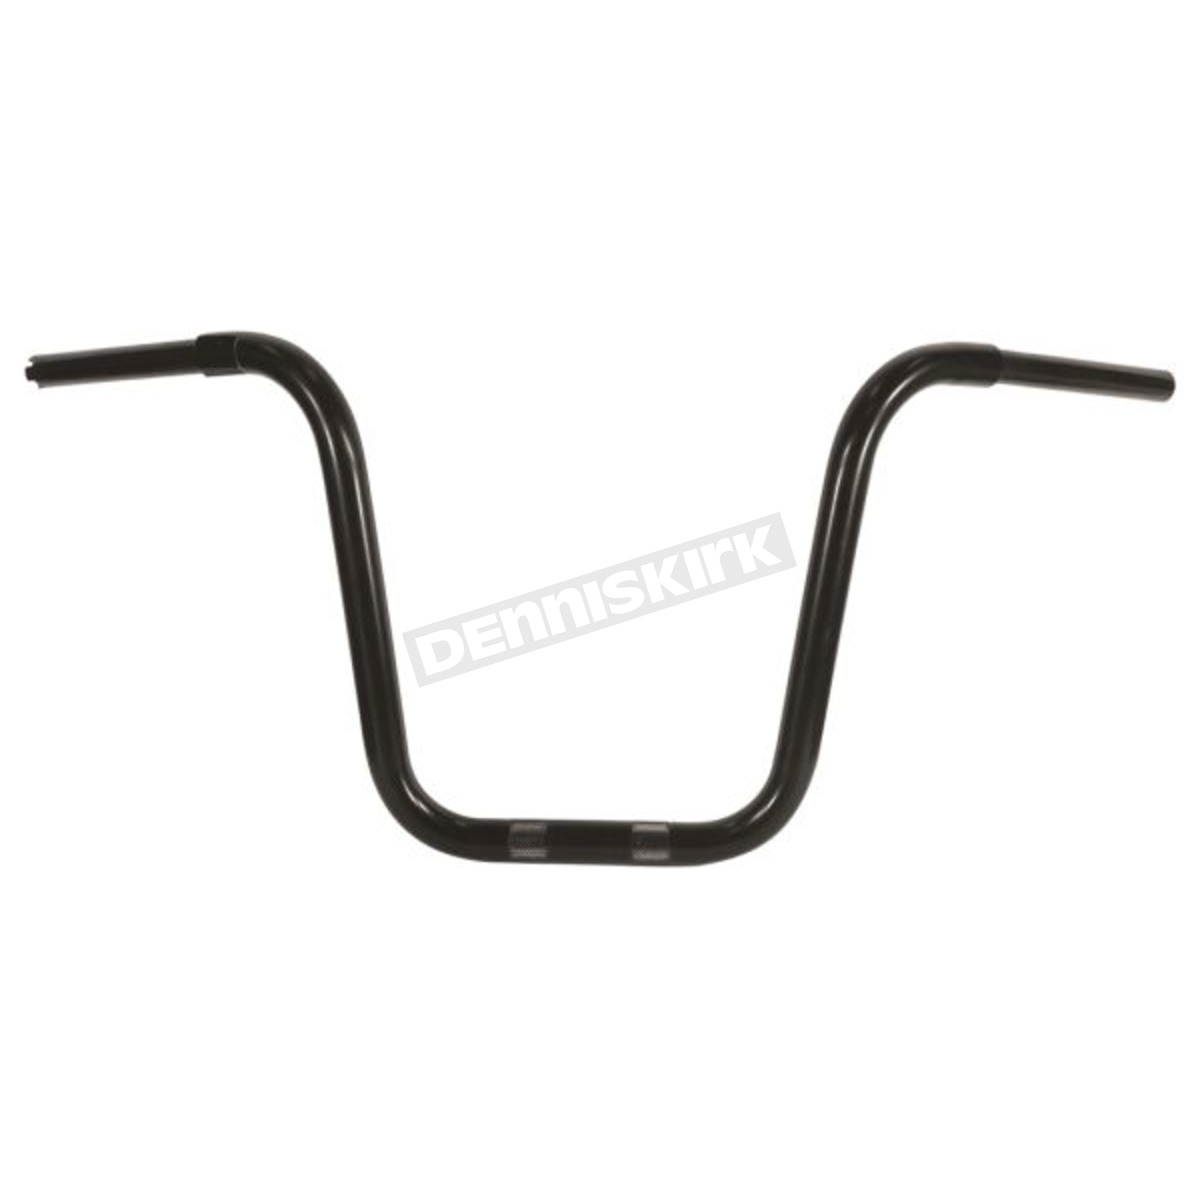 15" Wide Apehangers 1" Dimpled Harley Softail Dyna Sportster chopper HandleBars